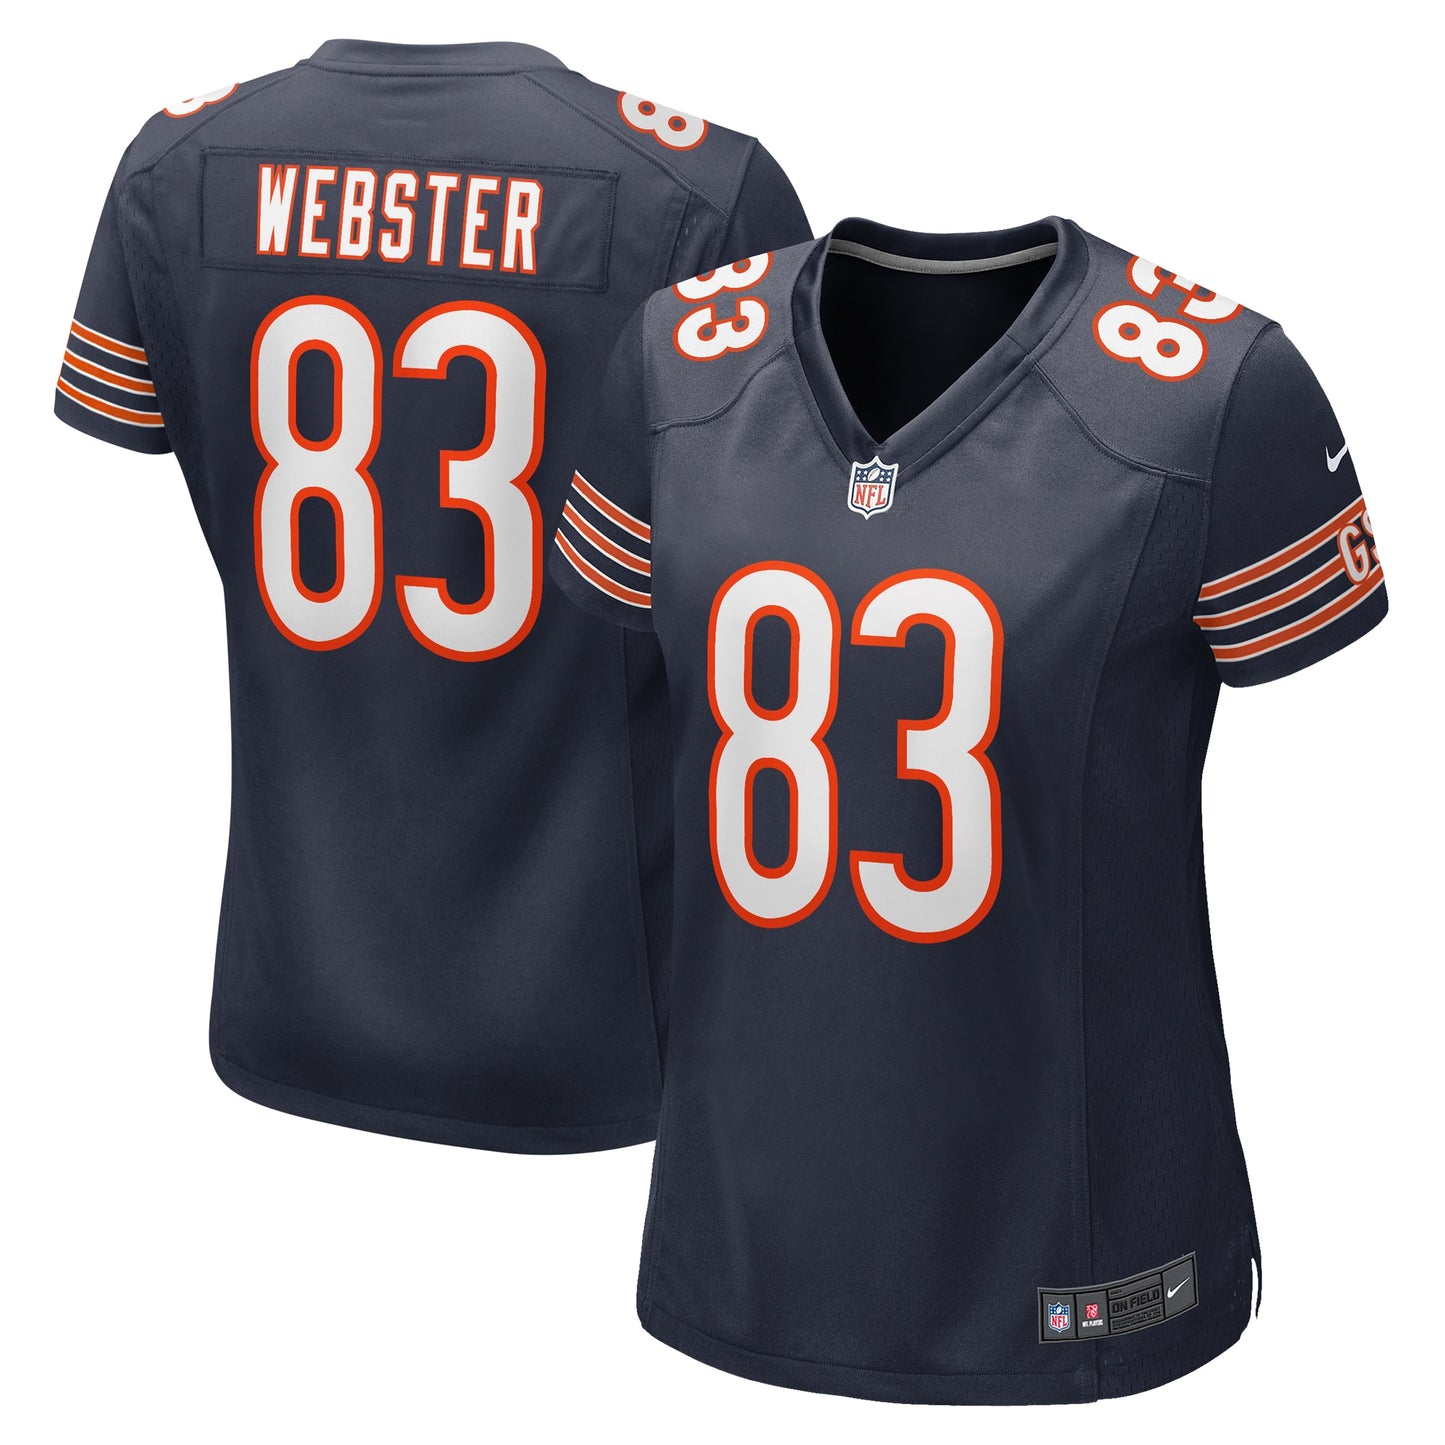 Nsimba Webster Chicago Bears Nike Women's Team Game Jersey -  Navy